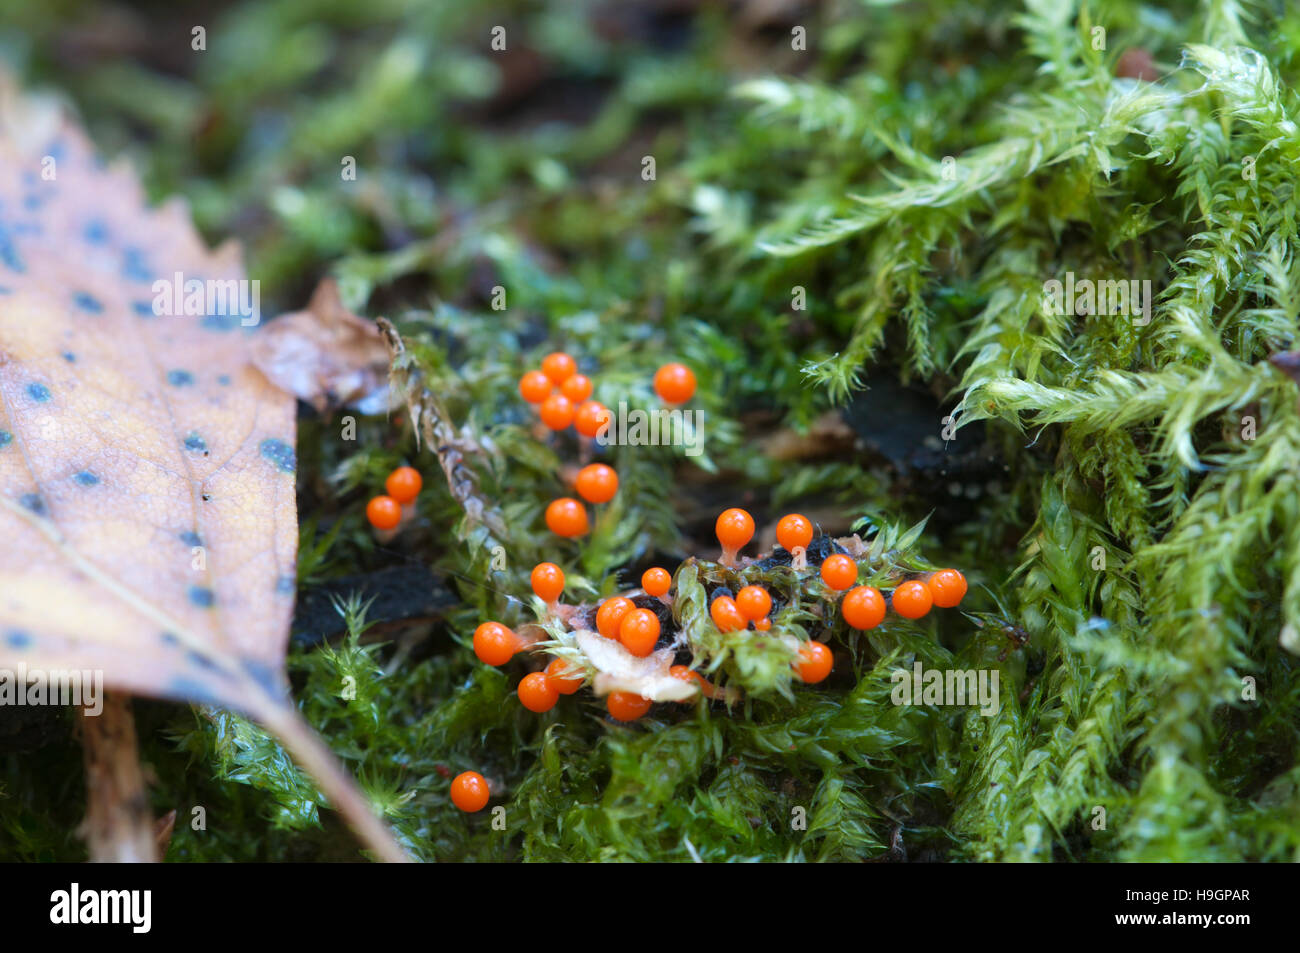 Mushrooms (slime mould Trichia decipiens )  on an old stump Stock Photo